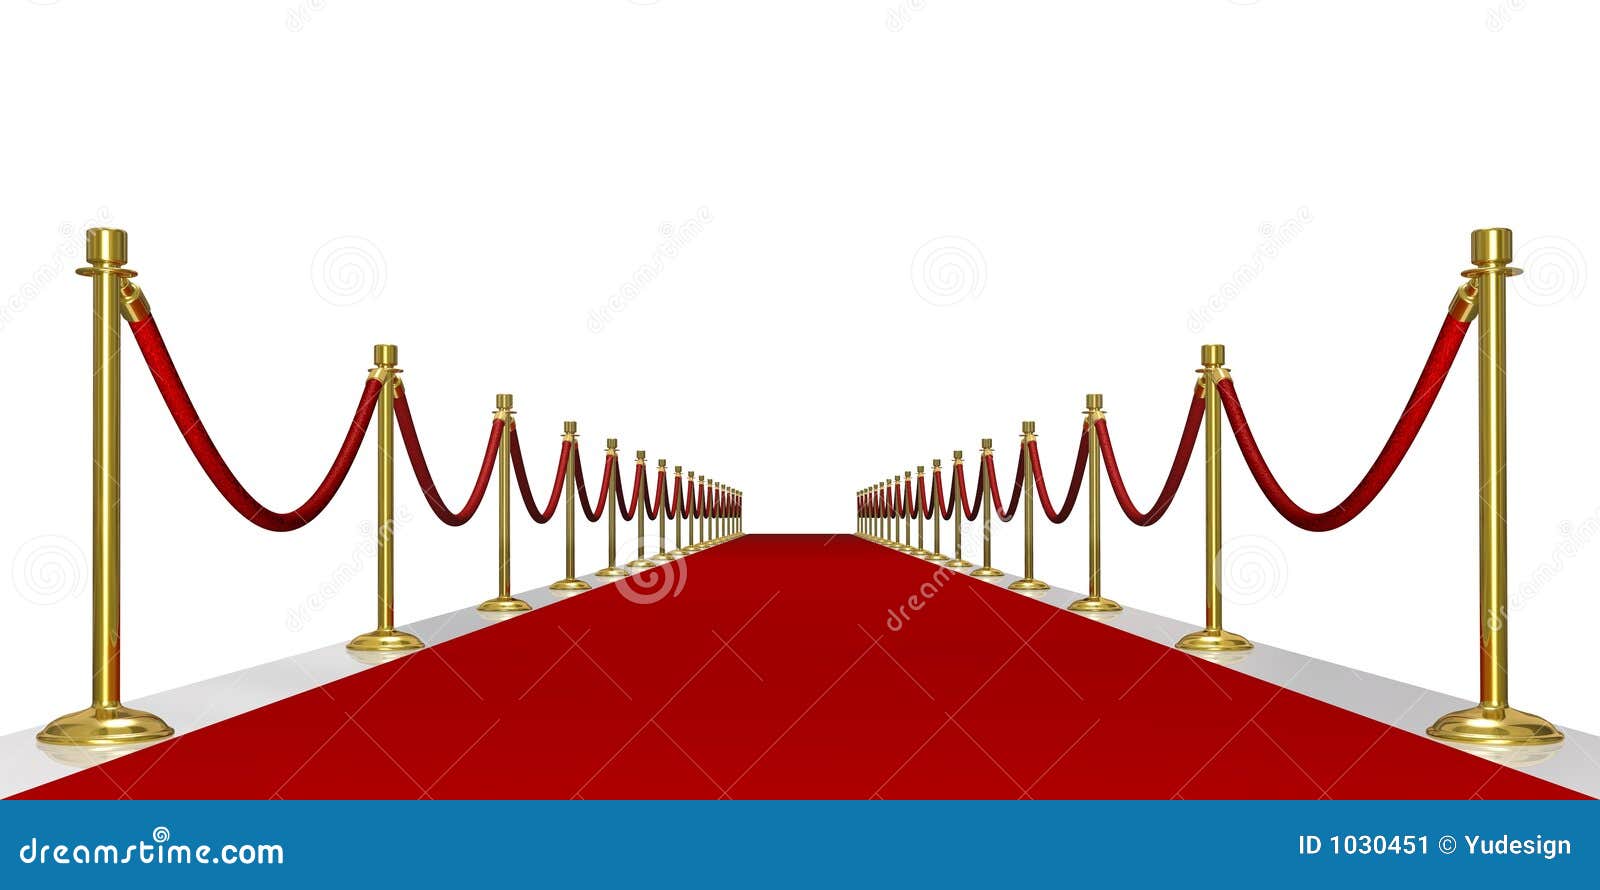 free clipart images red carpet - photo #11